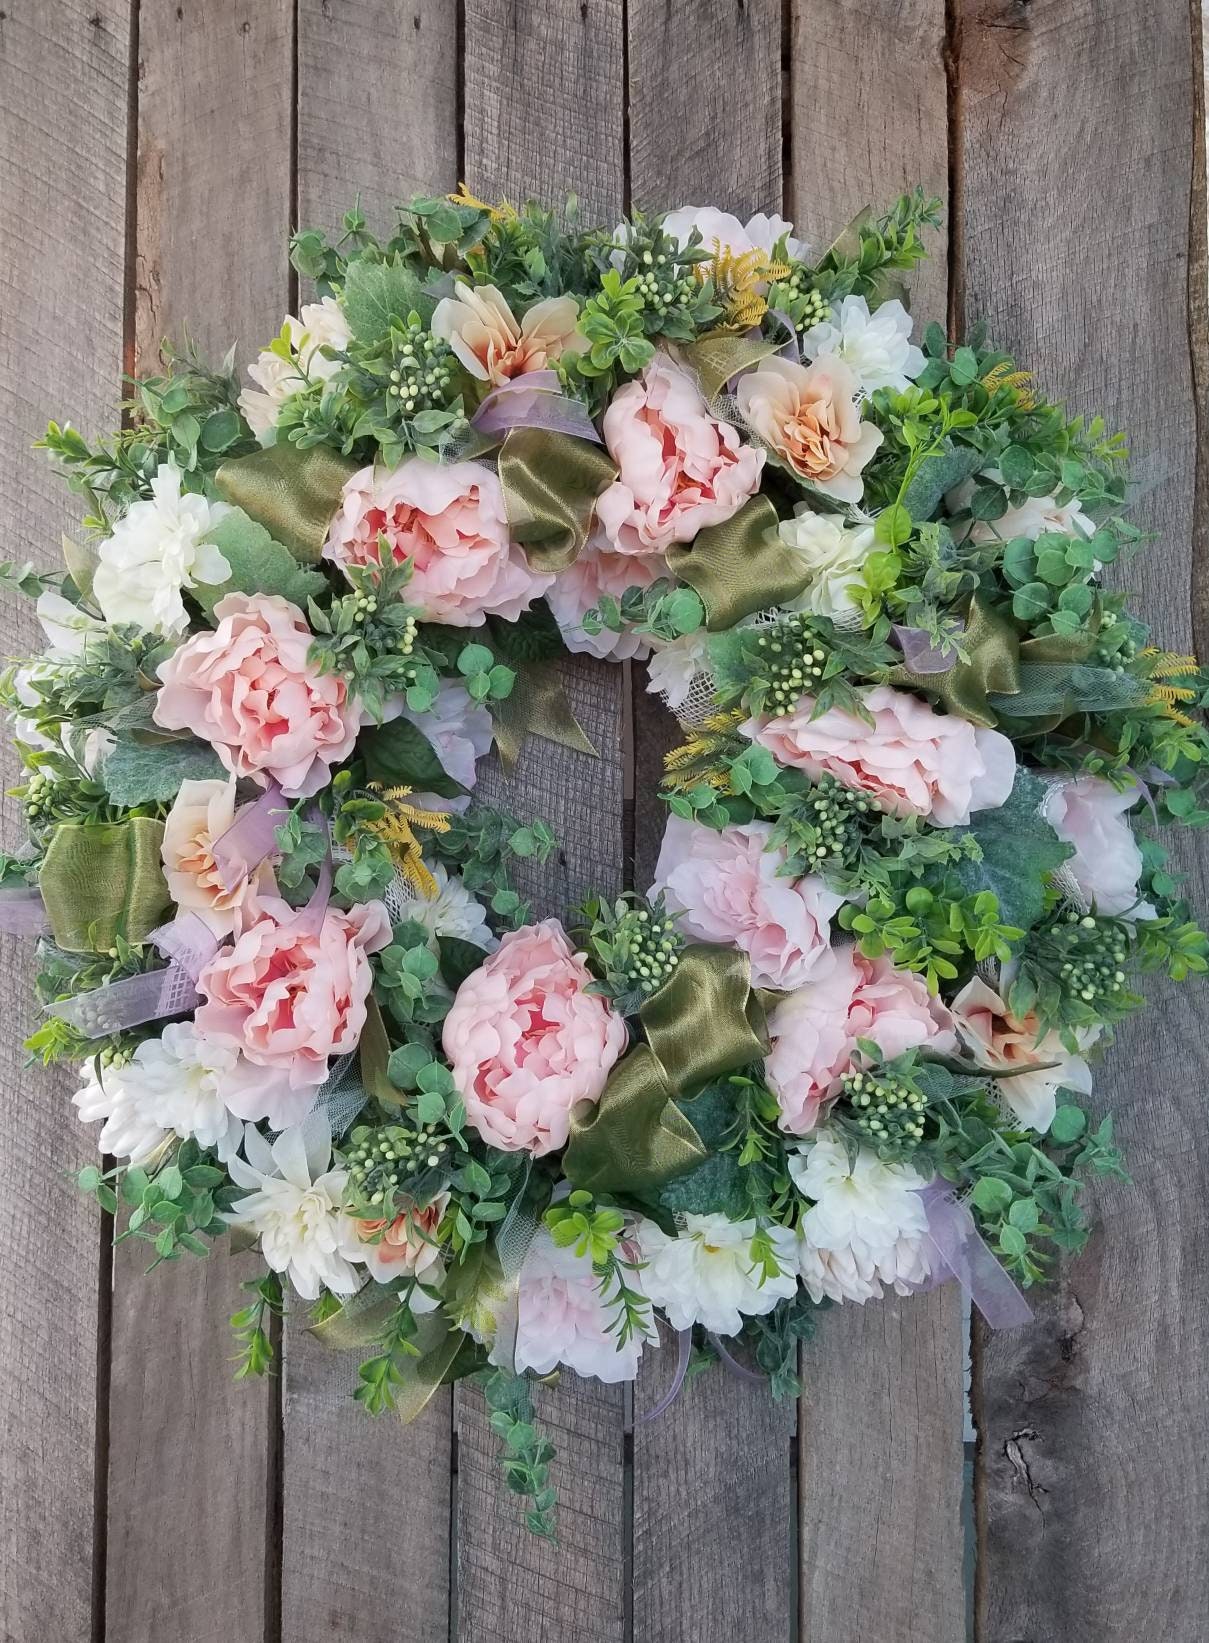 Tuimiyisou Flower Wreath,Peony Garland Artificial Peony and Green Leaves for Front Door Office Wall Garden Wedding Festival Decor 